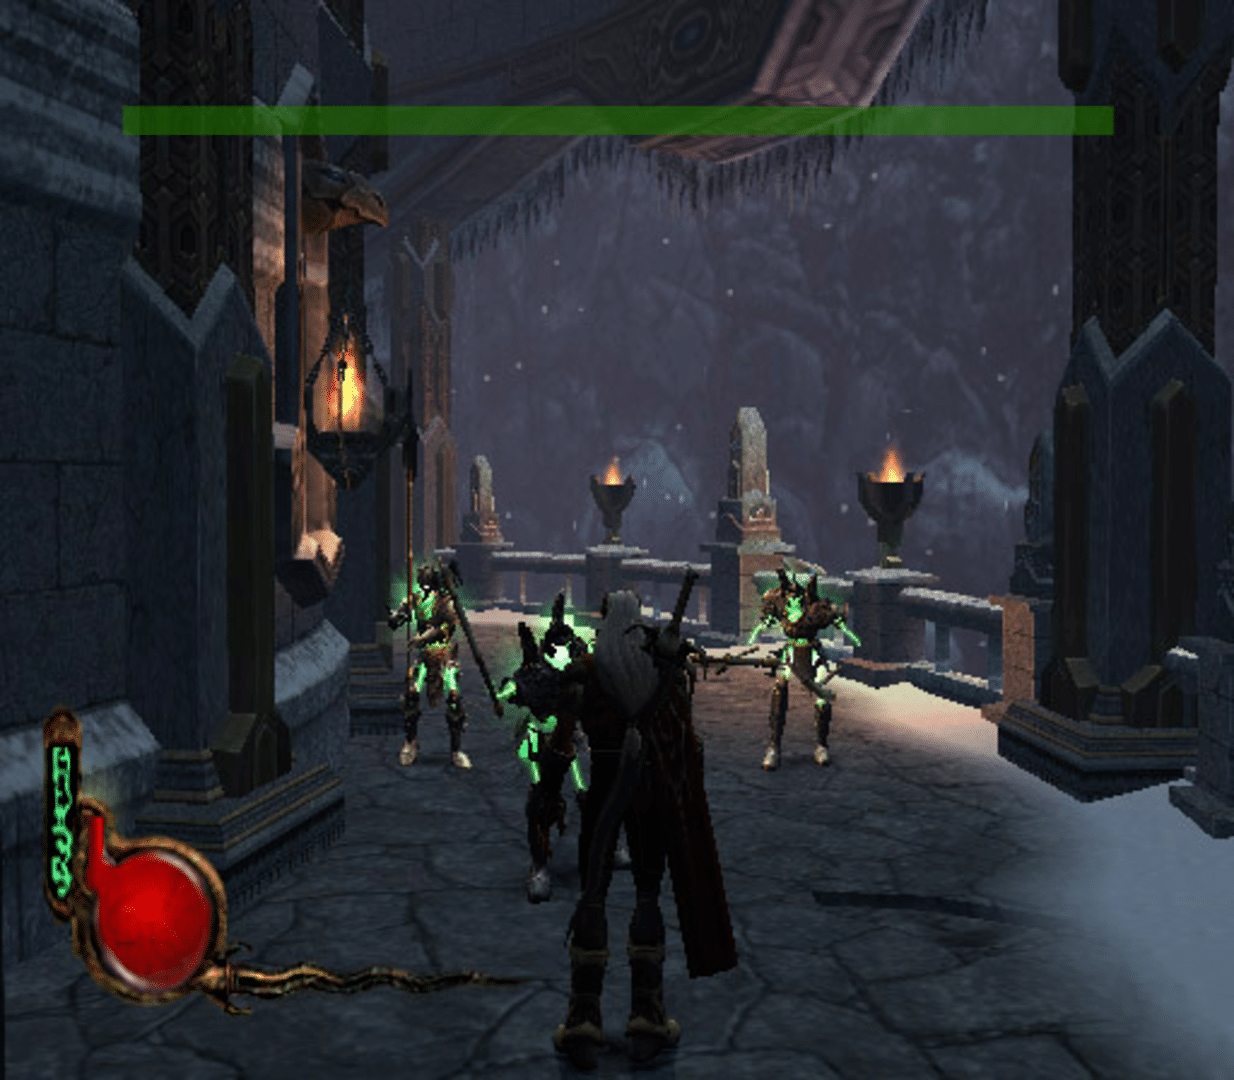 legacy of kain the dark prophecy